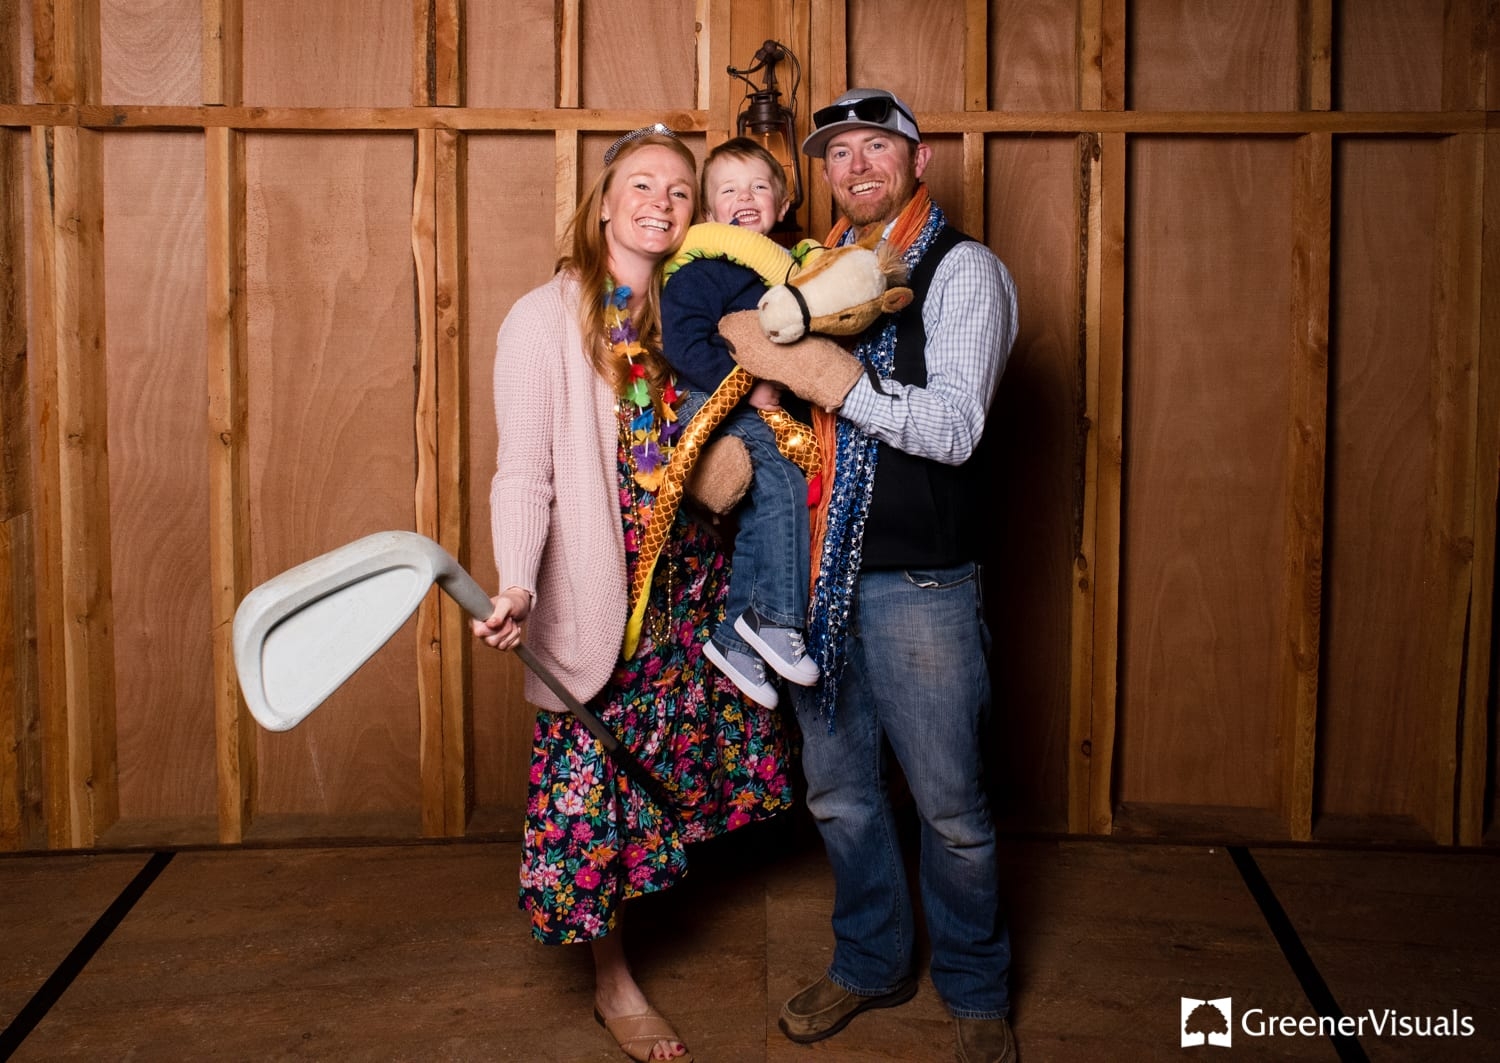 big-golf-club-play-photo-booth-headwaters-ranch